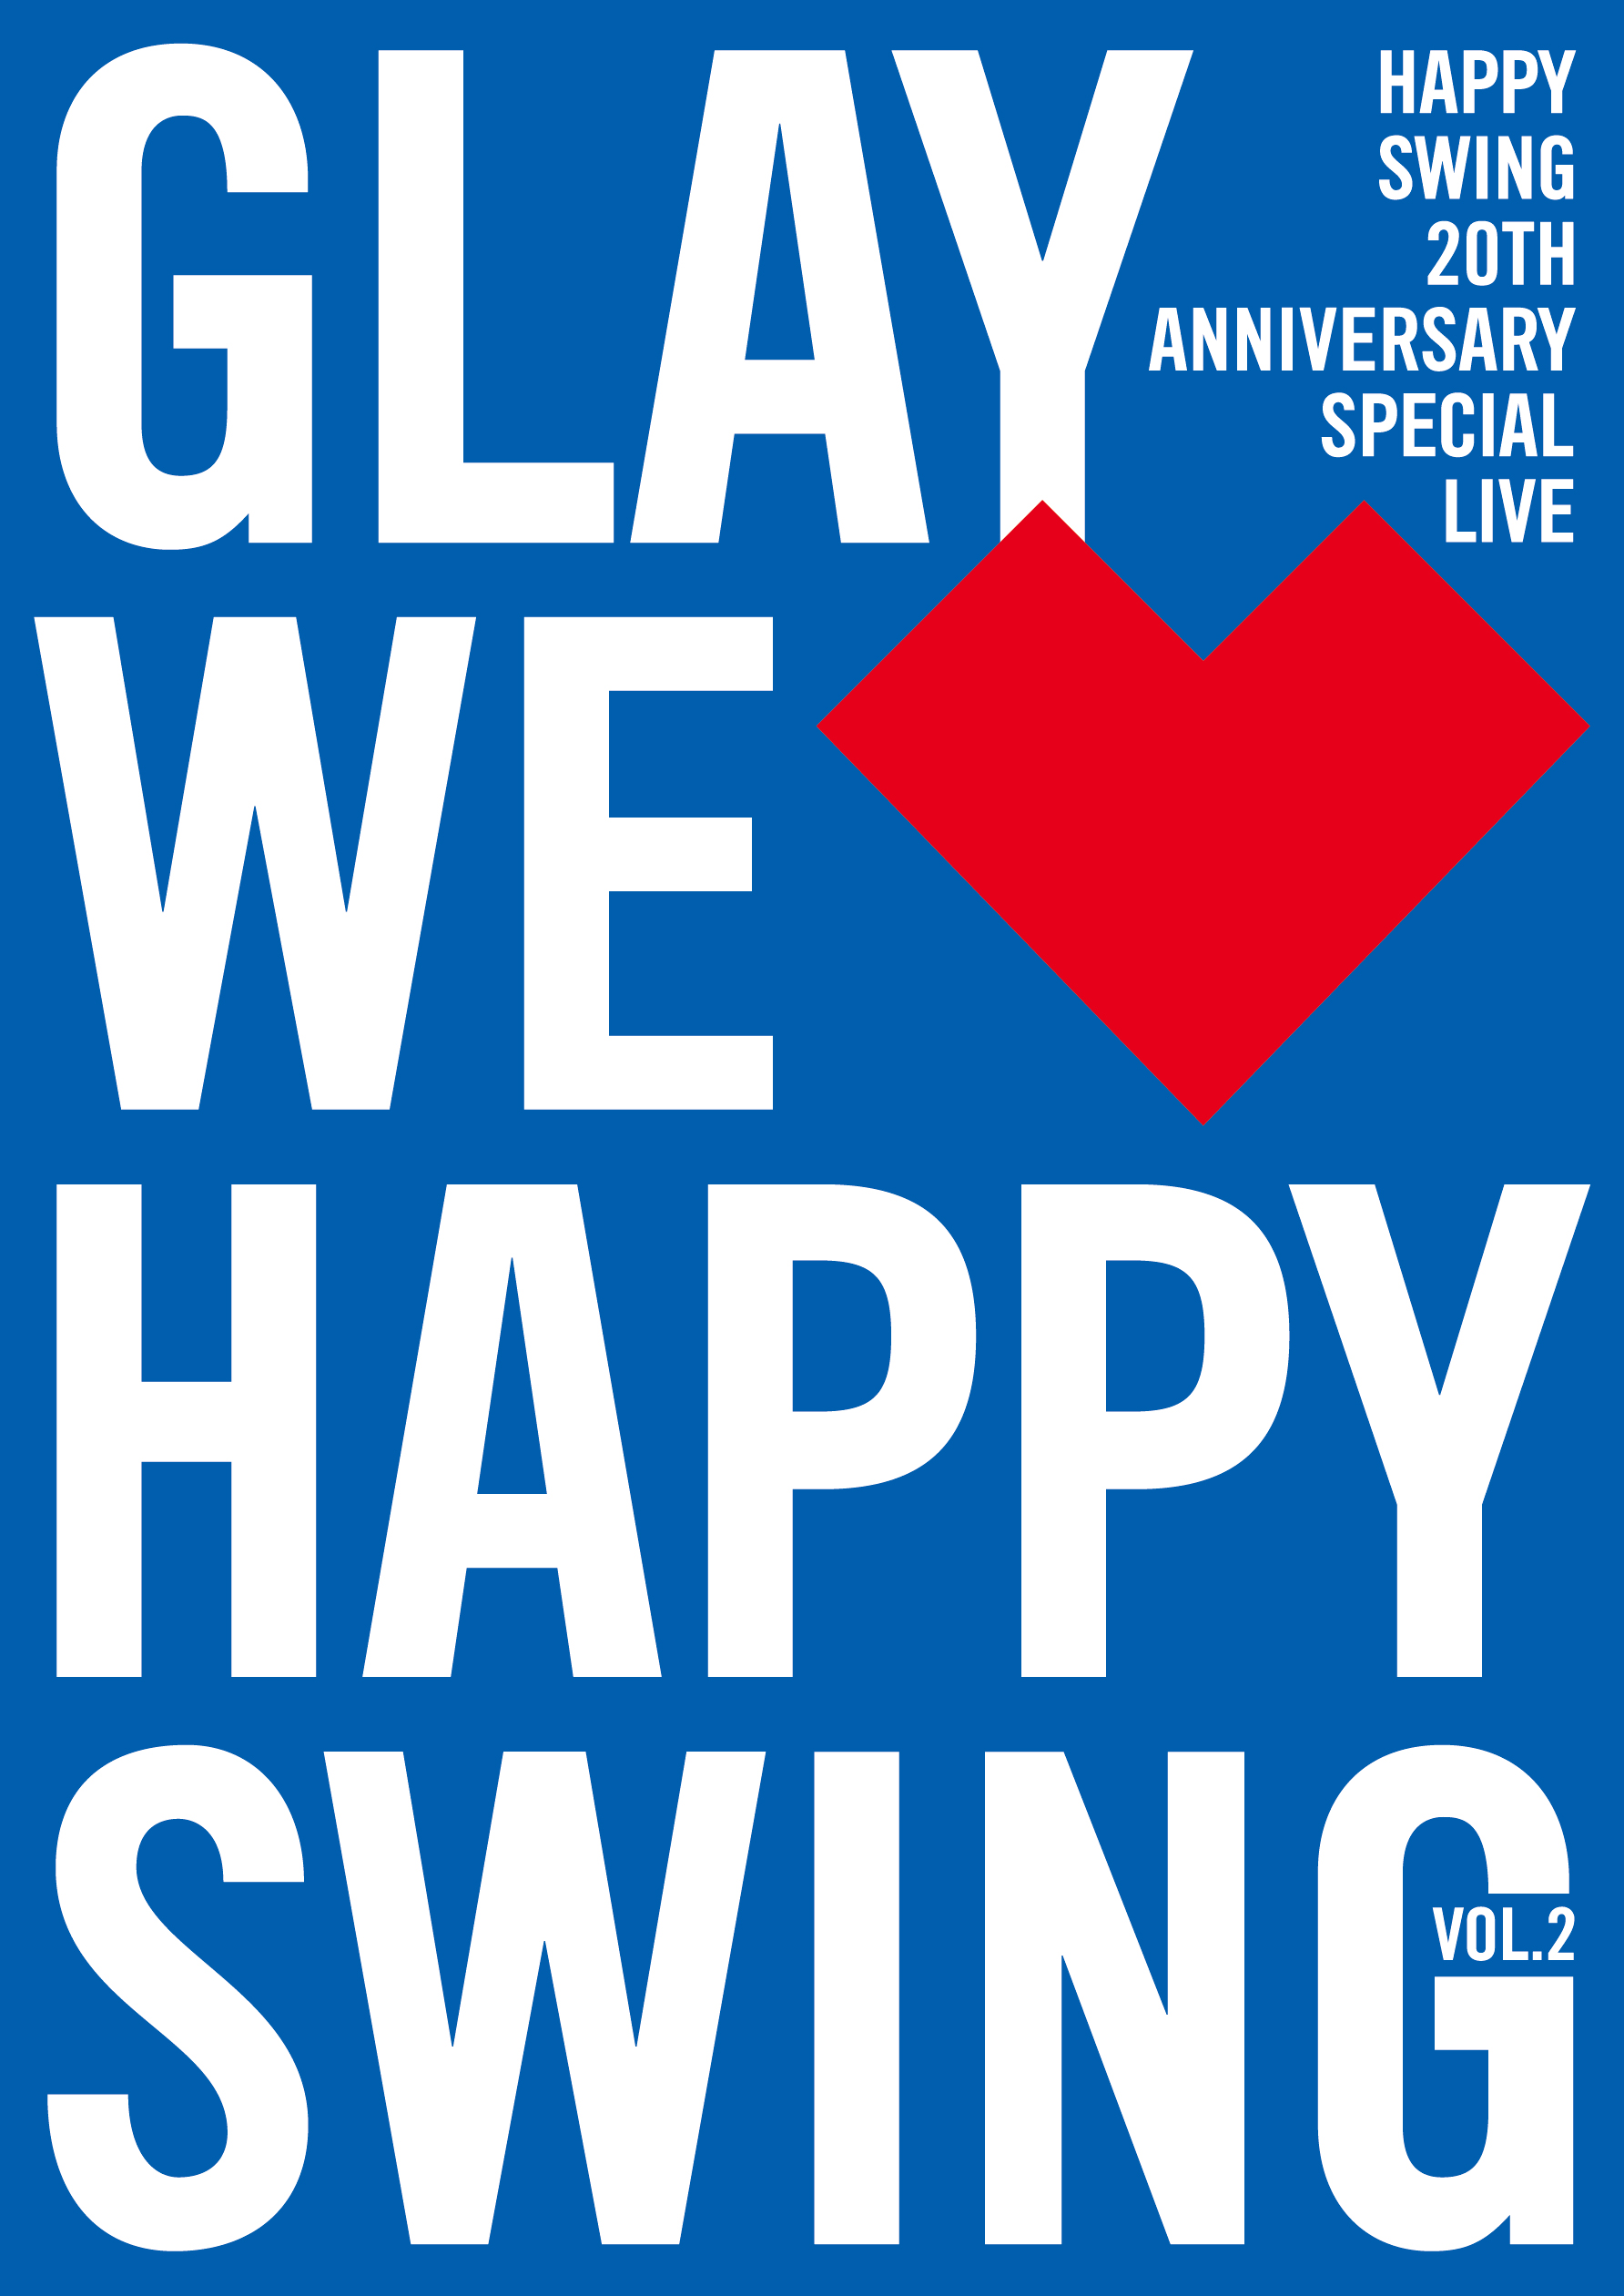 HAPPY SWING 20th Anniversary SPECIAL LIVE ～We♡Happy Swing～ Vol.2